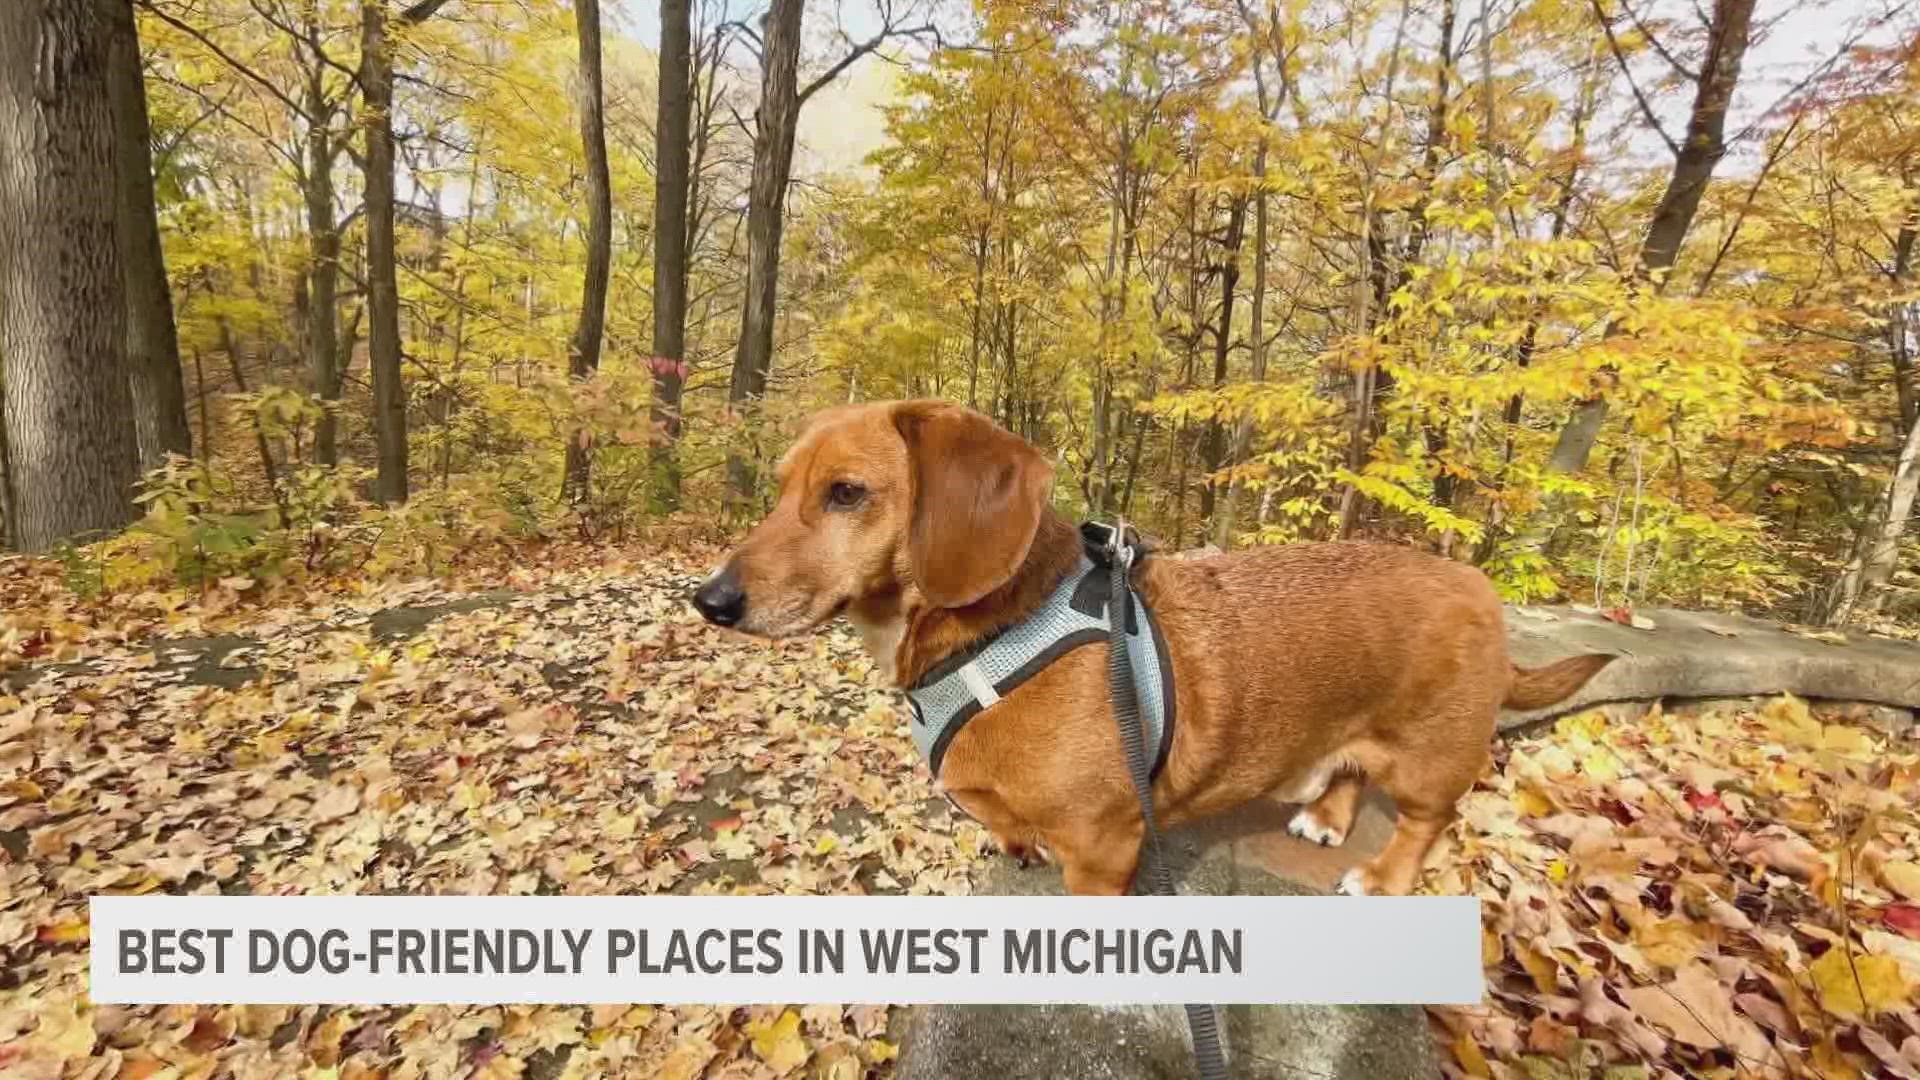 Last month, Rover and Zillow rated Grand Rapids the 20th fastest-growing dog-friendly city in the country.